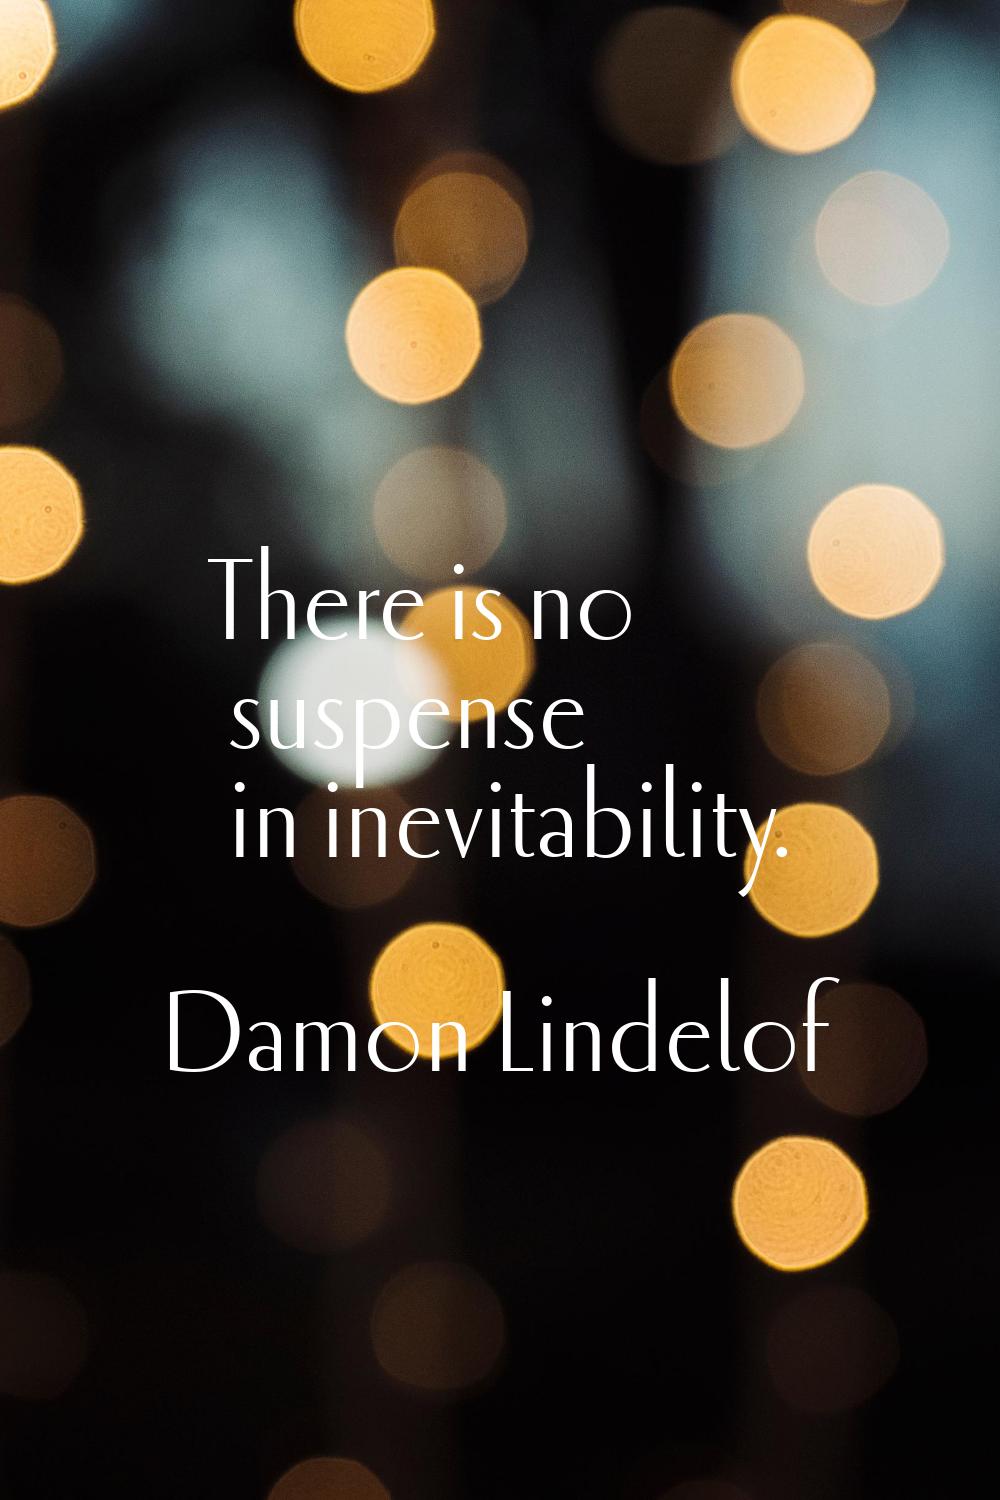 There is no suspense in inevitability.